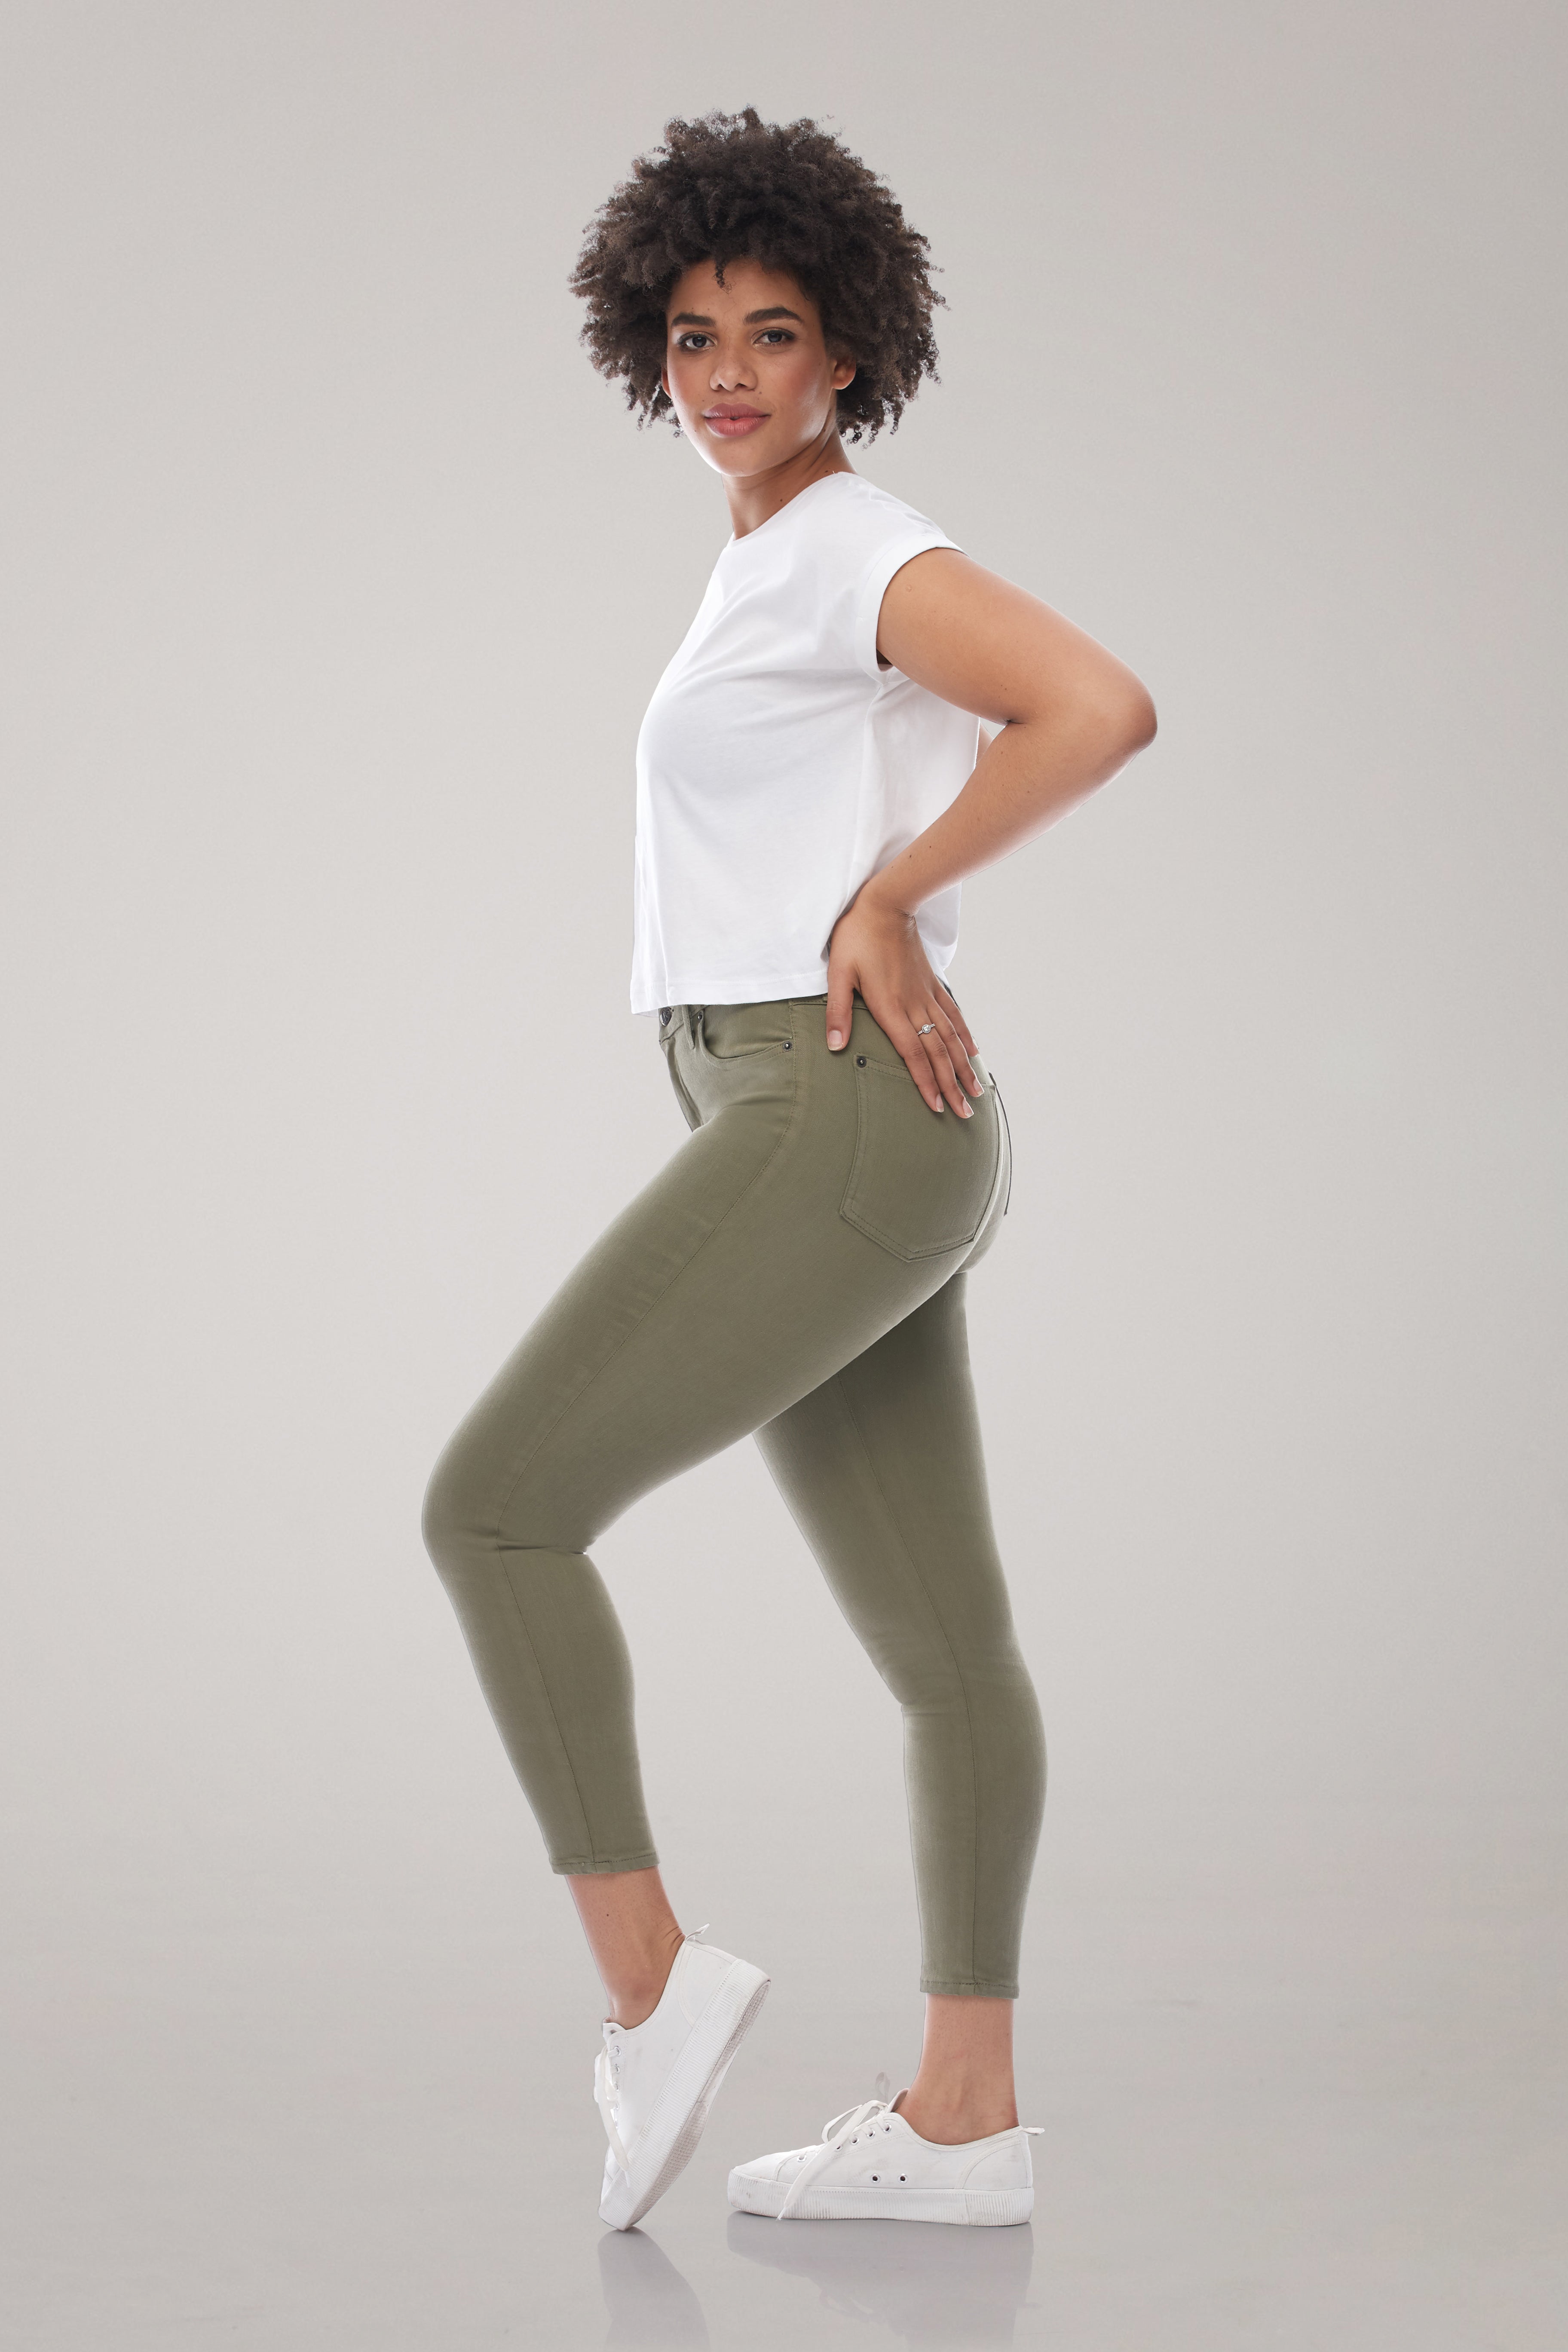 Rachel Classic Rise Skinny Ankle Yoga Jean, side view, Desert Road, 27 inch inseam, sizes 24-34, made in Canada